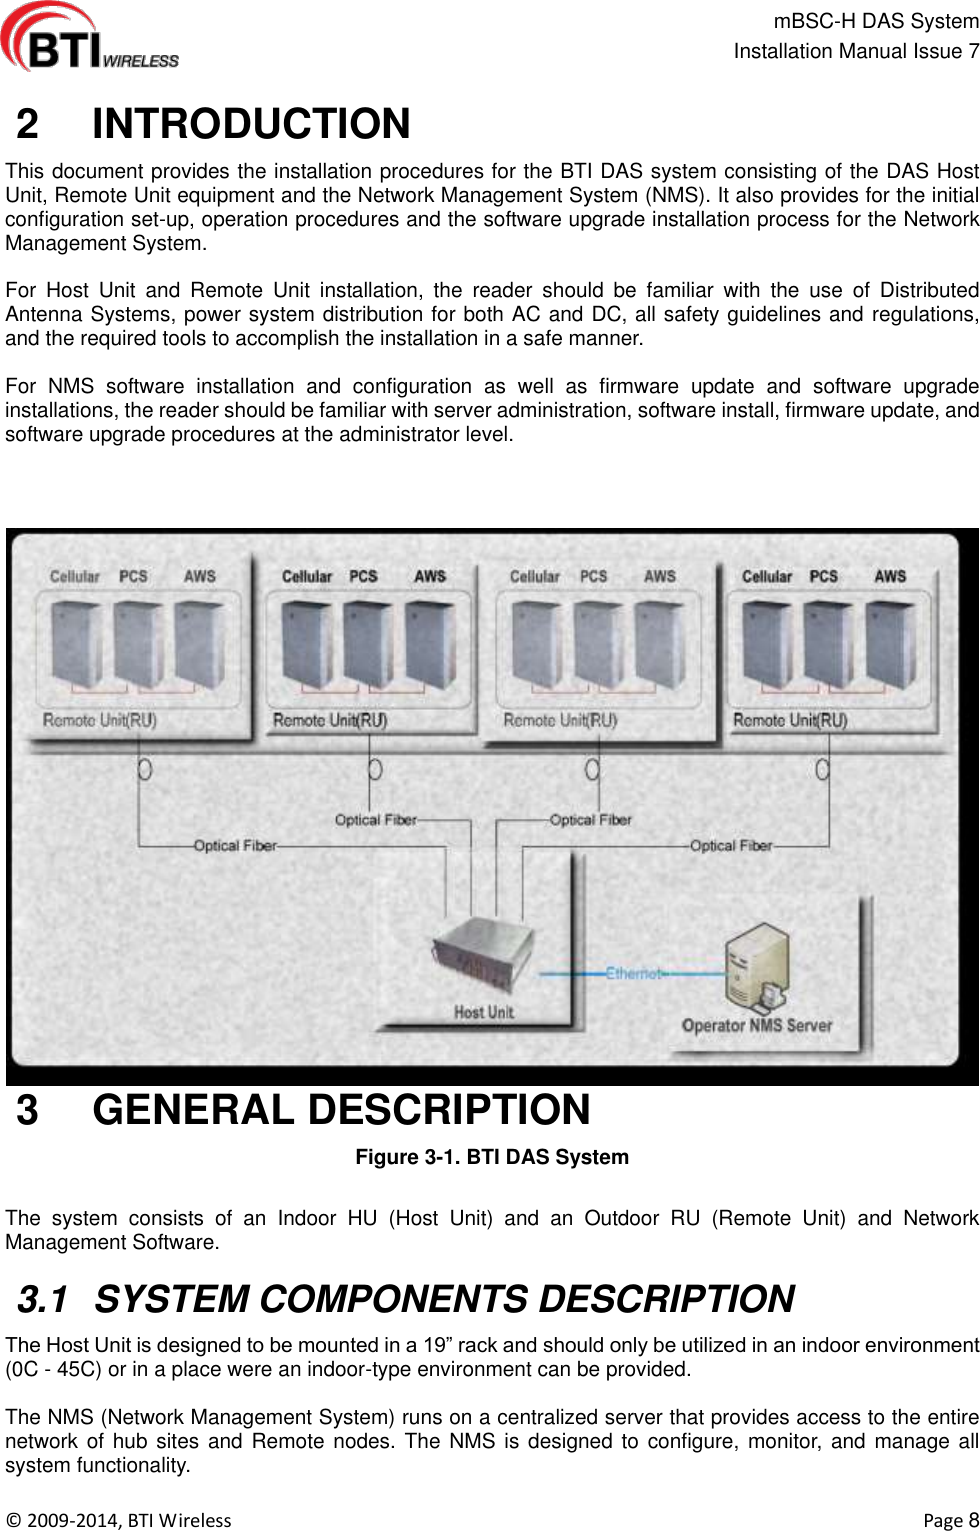                                                   mBSC-H DAS System   Installation Manual Issue 7  ©  2009-2014, BTI Wireless    Page 8   2   INTRODUCTION This document provides the installation procedures for the BTI DAS system consisting of the DAS Host Unit, Remote Unit equipment and the Network Management System (NMS). It also provides for the initial configuration set-up, operation procedures and the software upgrade installation process for the Network Management System.    For  Host  Unit  and  Remote  Unit  installation,  the  reader  should  be  familiar  with  the  use  of  Distributed Antenna Systems, power system distribution for both AC and DC, all safety guidelines and regulations, and the required tools to accomplish the installation in a safe manner.    For  NMS  software  installation  and  configuration  as  well  as  firmware  update  and  software  upgrade installations, the reader should be familiar with server administration, software install, firmware update, and software upgrade procedures at the administrator level.   3   GENERAL DESCRIPTION Figure 3-1. BTI DAS System    The  system  consists  of  an  Indoor  HU  (Host  Unit)  and  an  Outdoor  RU  (Remote  Unit)  and  Network Management Software.     3.1  SYSTEM COMPONENTS DESCRIPTION The Host Unit is designed to be mounted in a 19” rack and should only be utilized in an indoor environment (0C - 45C) or in a place were an indoor-type environment can be provided.  The NMS (Network Management System) runs on a centralized server that provides access to the entire network of  hub sites  and Remote  nodes. The NMS is designed to configure, monitor, and manage all system functionality. 